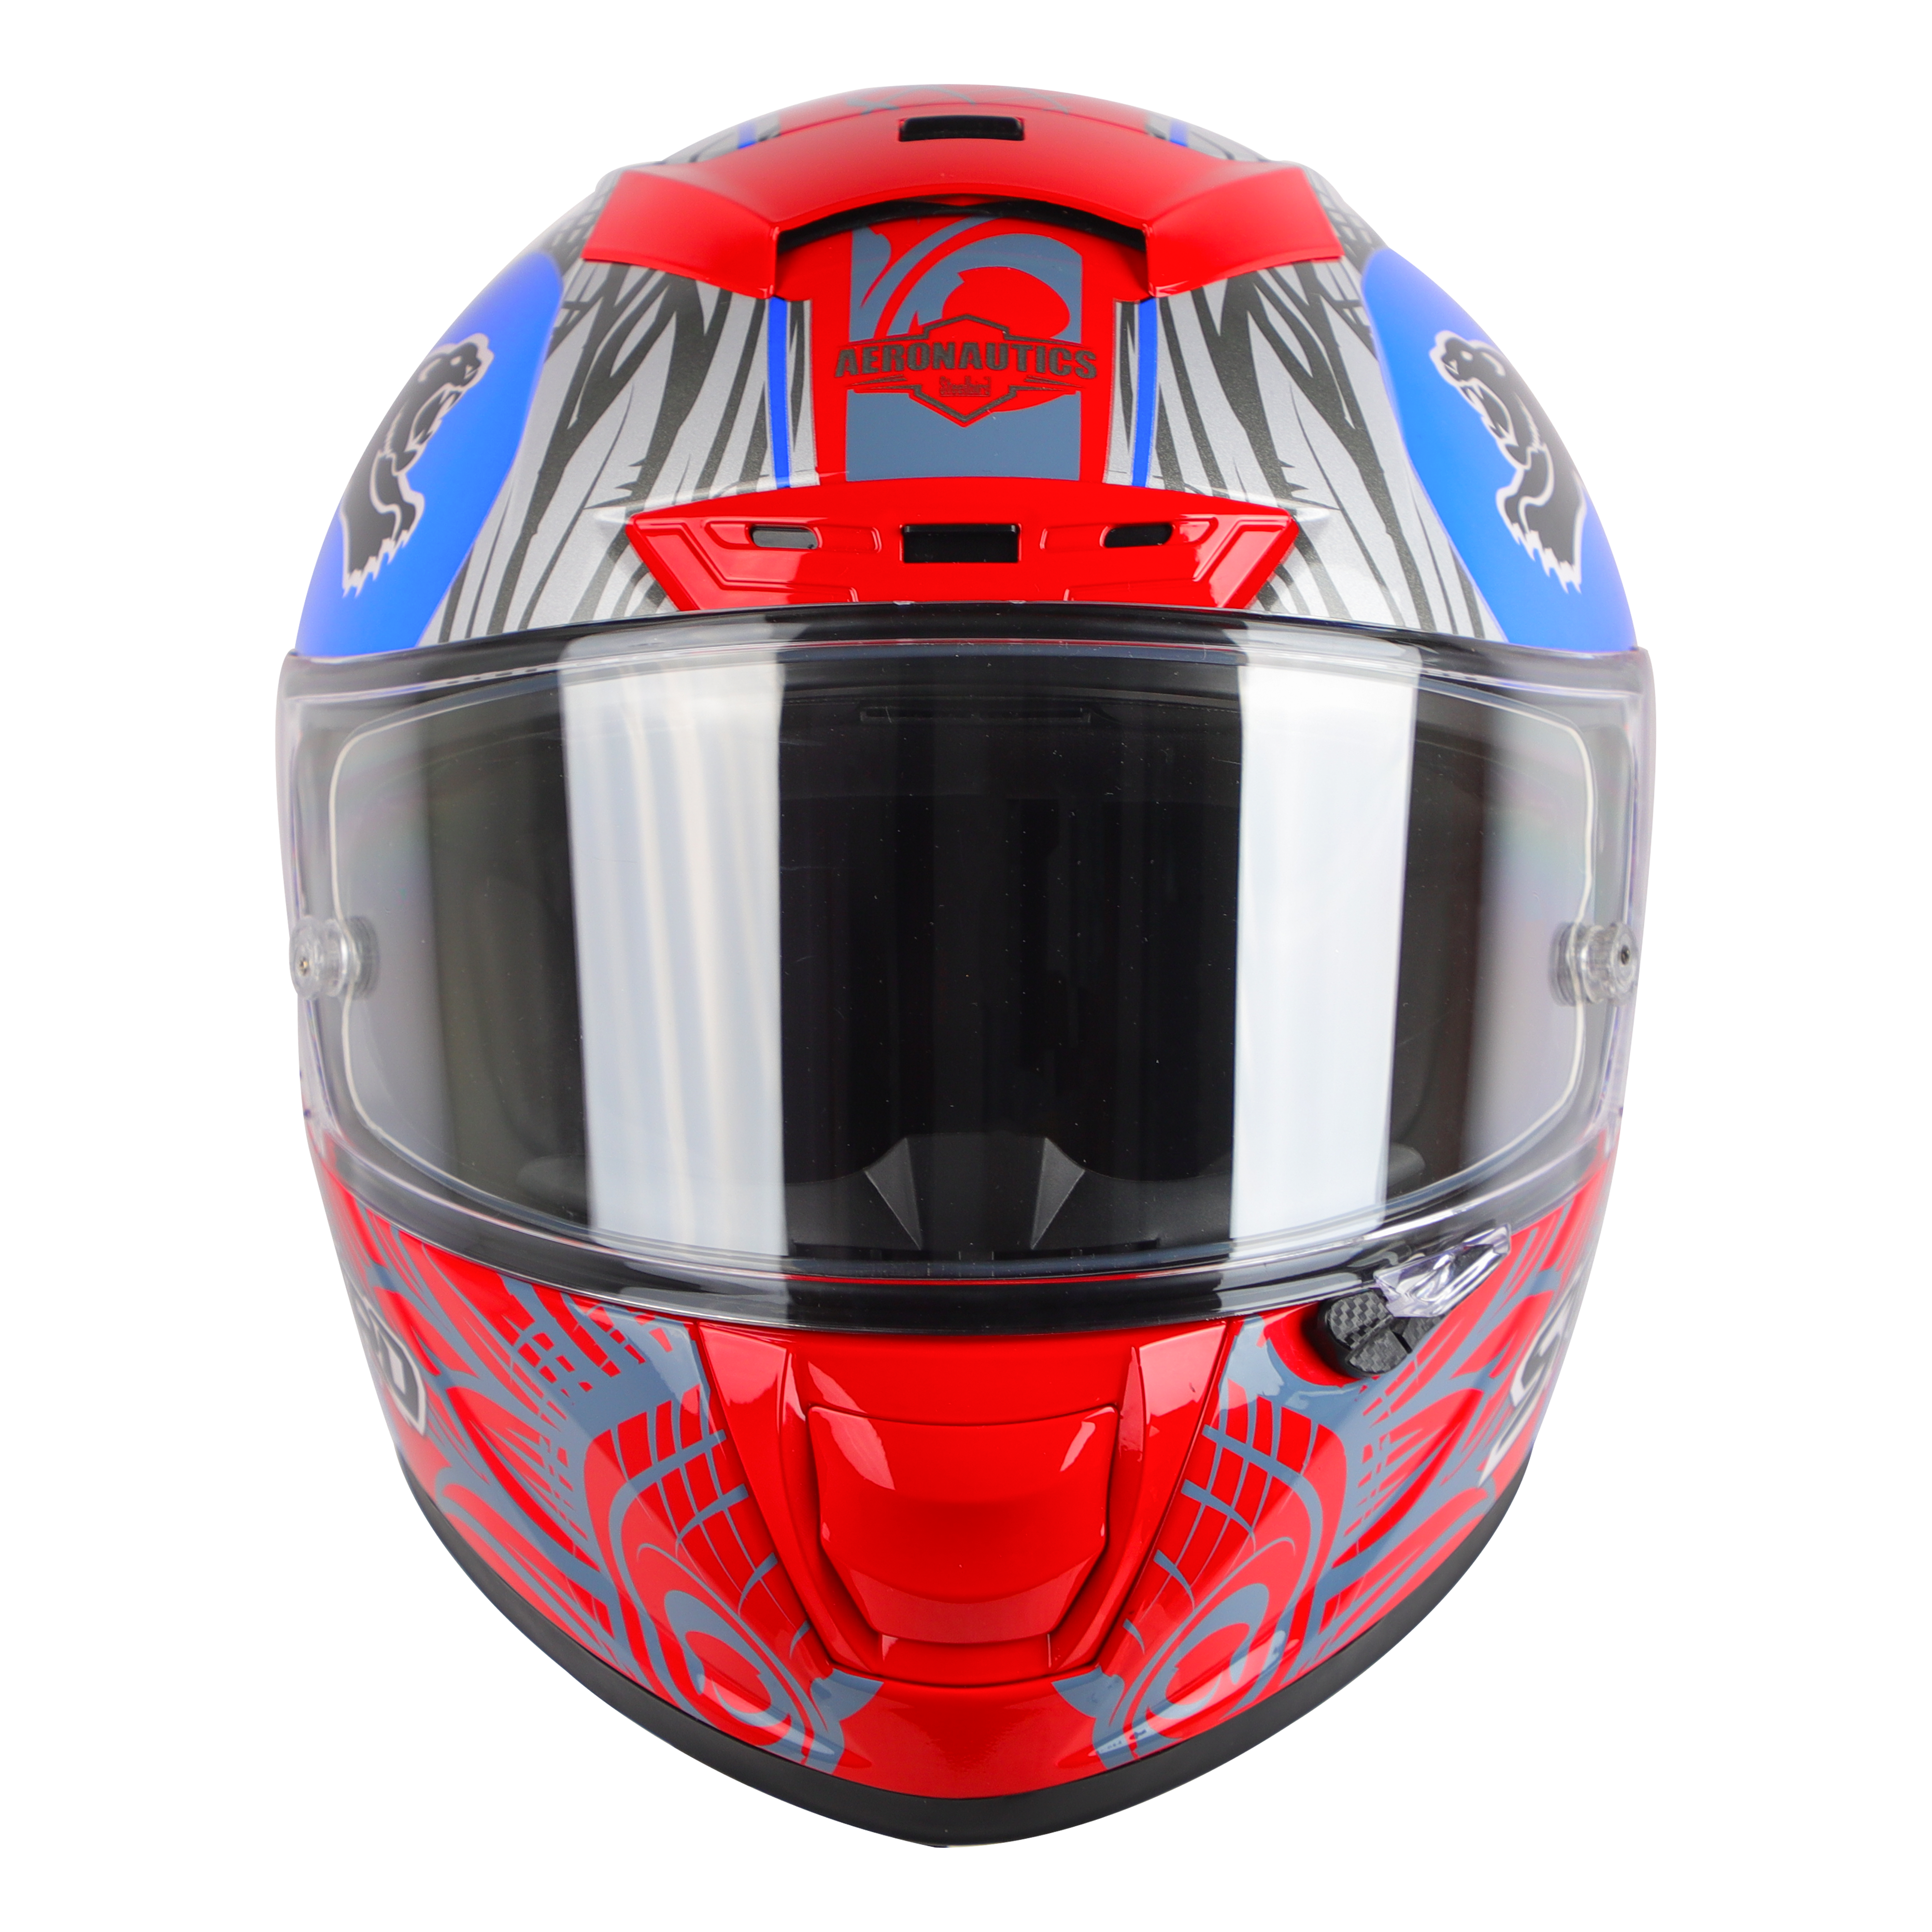 SA-5 DOT FLYDECK MAT RED WITH BLUE (WITH ANTI-FOG SHIELD VISOR) 